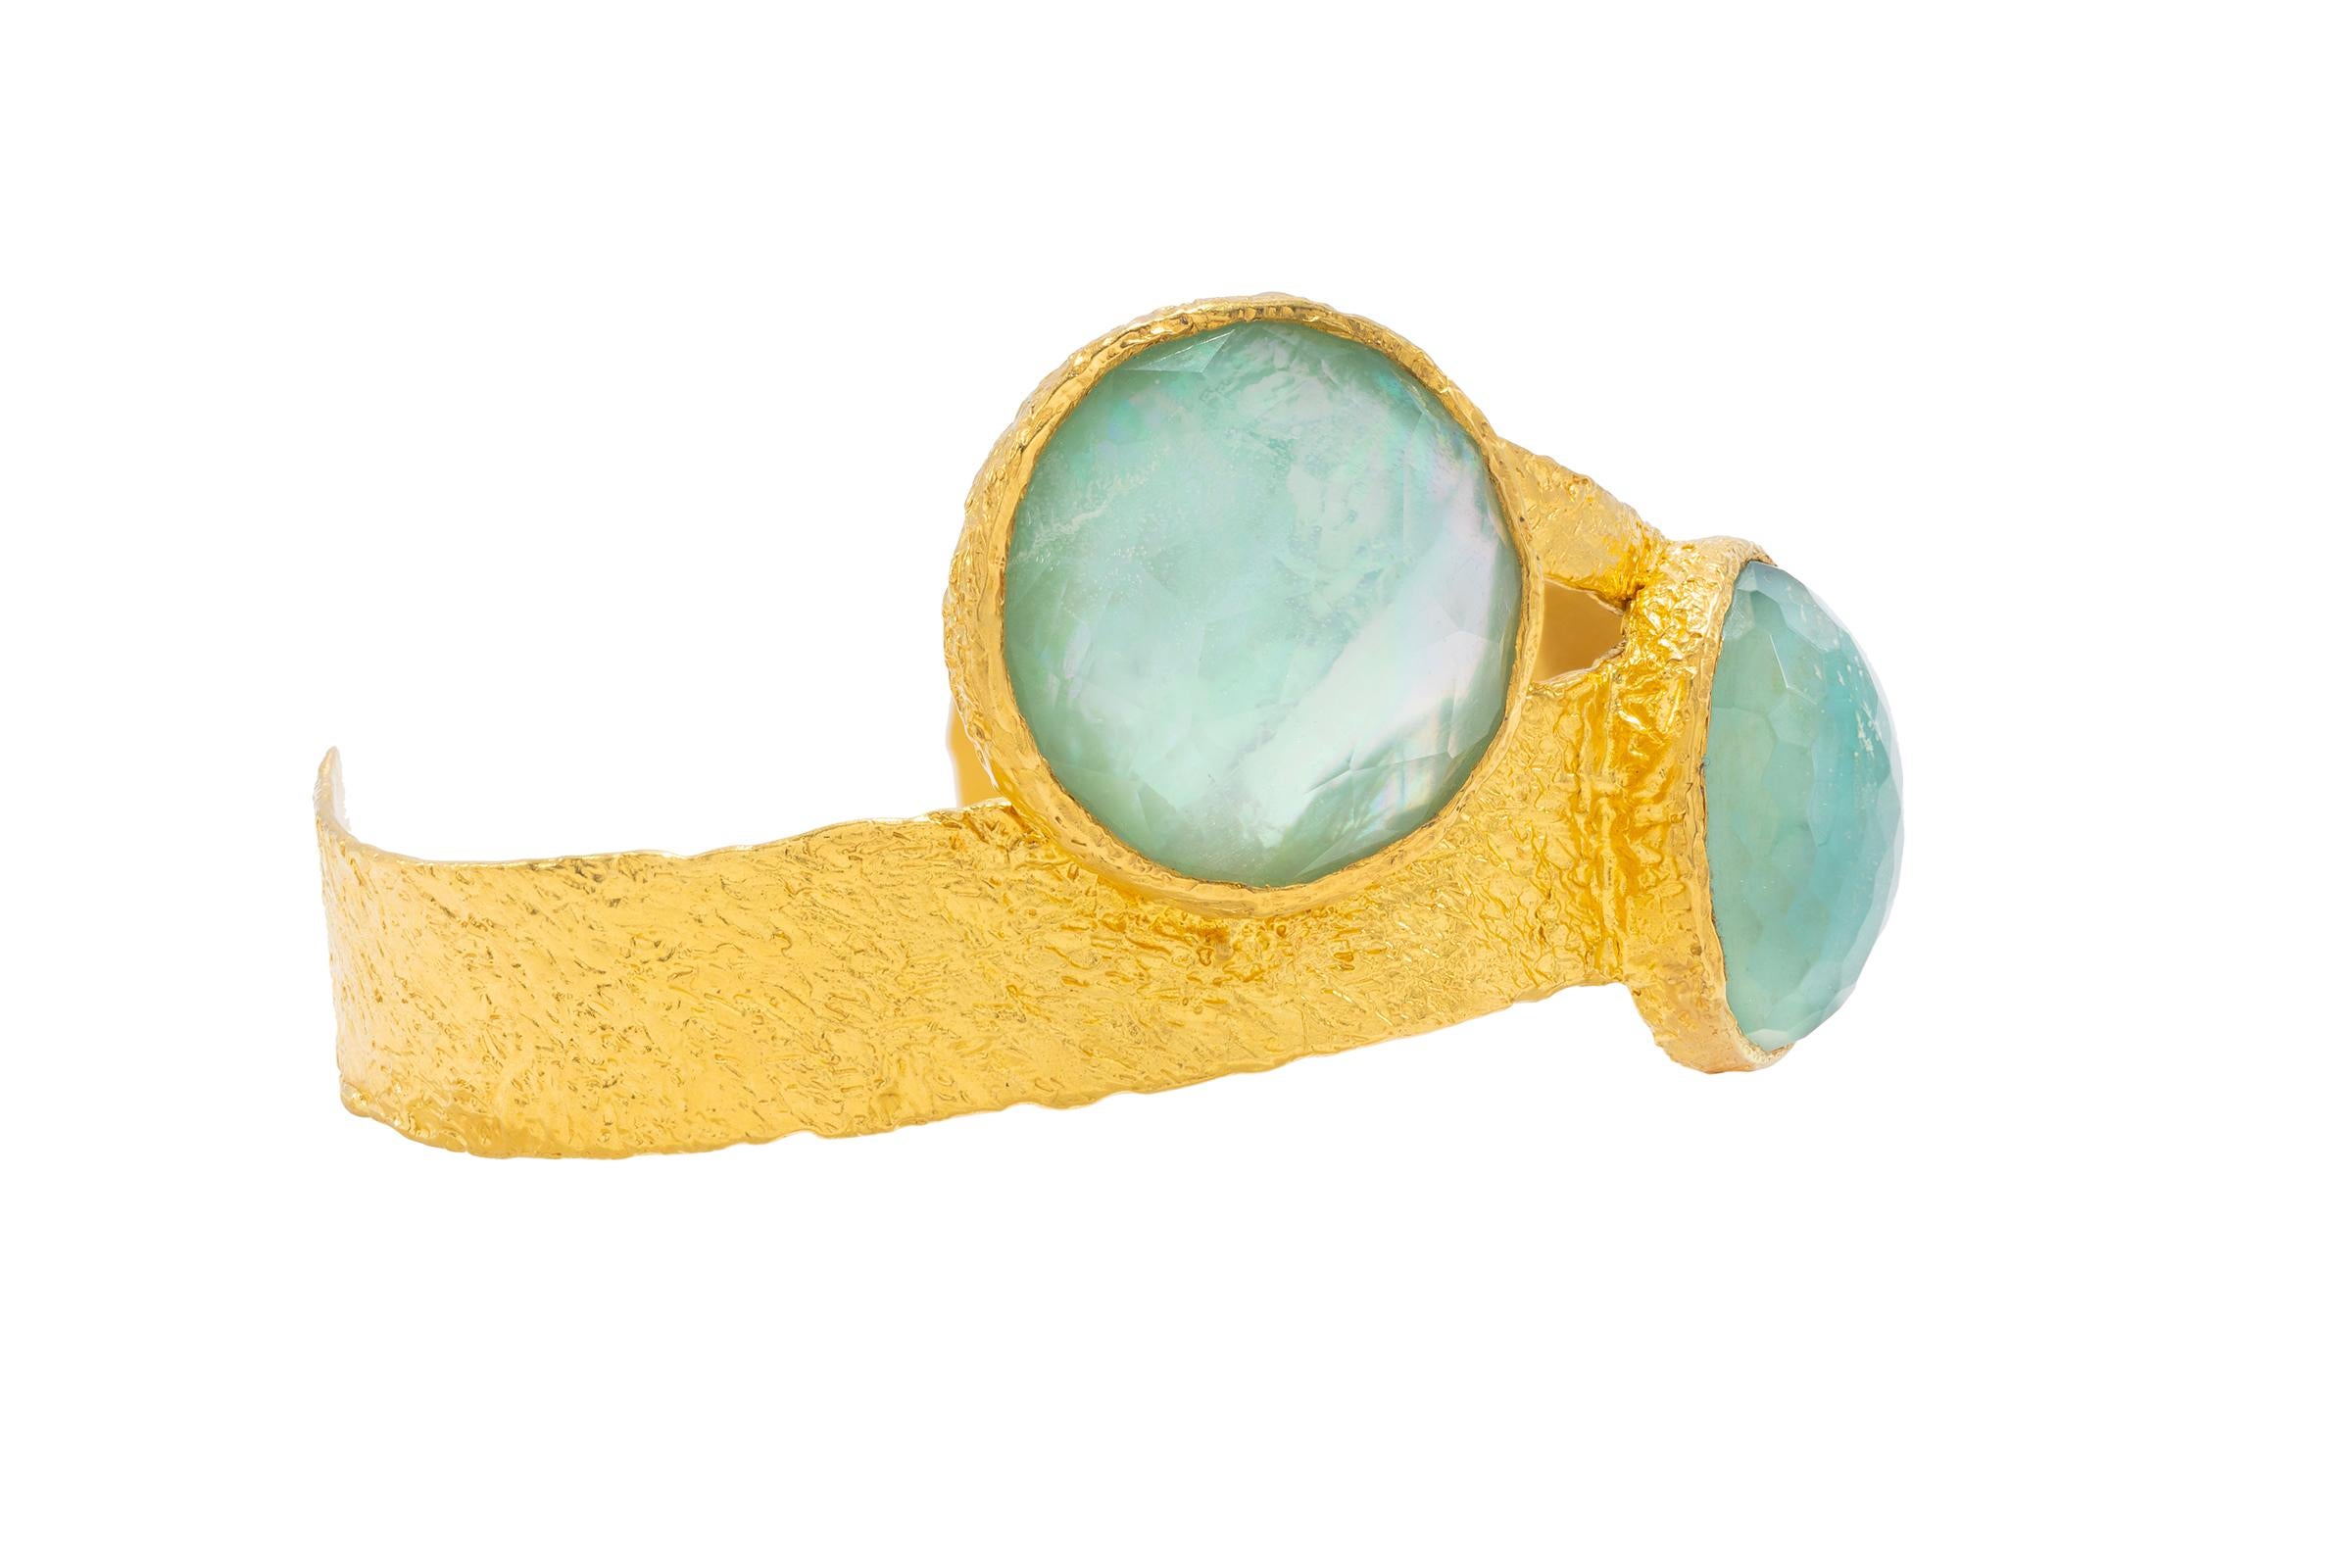 Artisan Eclipse 22k Gold Cuff with Turquoise, Pearl and Quartz, by Tagili